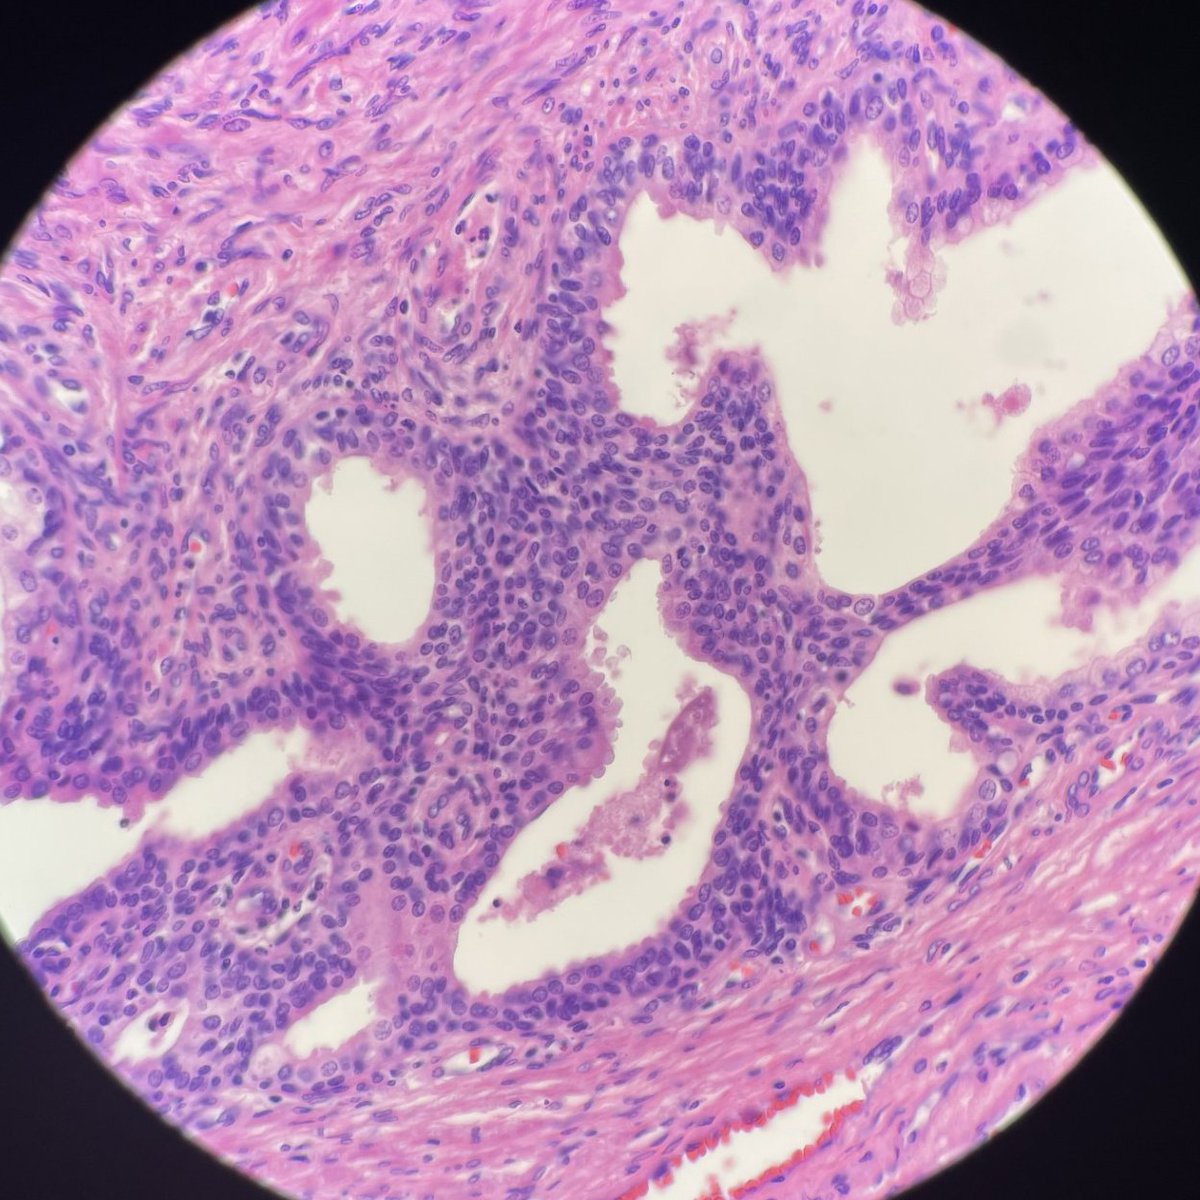 One of the most important things about prostate pathology is recognizing benign mimics of adenocarcinoma. This is just basal layer hyperplasia with a pseudocribriform pattern. #PathTwitter #GUPath